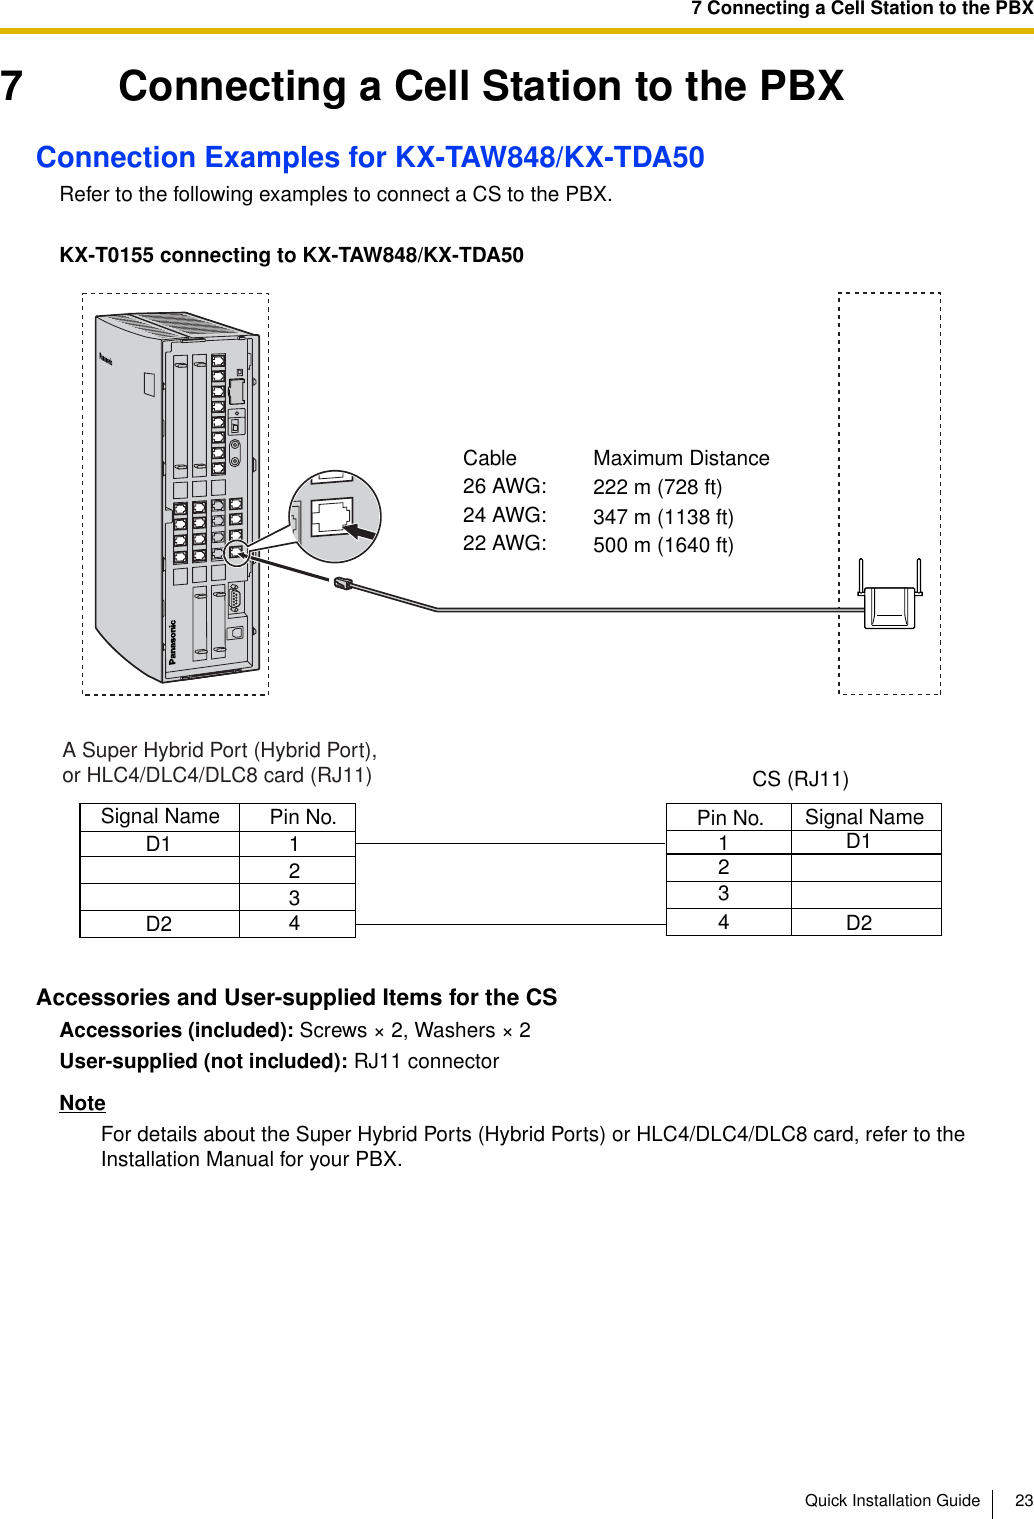 7 Connecting a Cell Station to the PBXQuick Installation Guide 237 Connecting a Cell Station to the PBXConnection Examples for KX-TAW848/KX-TDA50Refer to the following examples to connect a CS to the PBX.KX-T0155 connecting to KX-TAW848/KX-TDA50Accessories and User-supplied Items for the CSAccessories (included): Screws × 2, Washers × 2User-supplied (not included): RJ11 connectorNoteFor details about the Super Hybrid Ports (Hybrid Ports) or HLC4/DLC4/DLC8 card, refer to the Installation Manual for your PBX.A Super Hybrid Port (Hybrid Port), or HLC4/DLC4/DLC8 card (RJ11) CS (RJ11)Maximum Distance222 m (728 ft)347 m (1138 ft)500 m (1640 ft)Cable26 AWG:24 AWG:22 AWG:Signal NameSignal Name Pin No.1234D1D2D1D2Pin No.1234